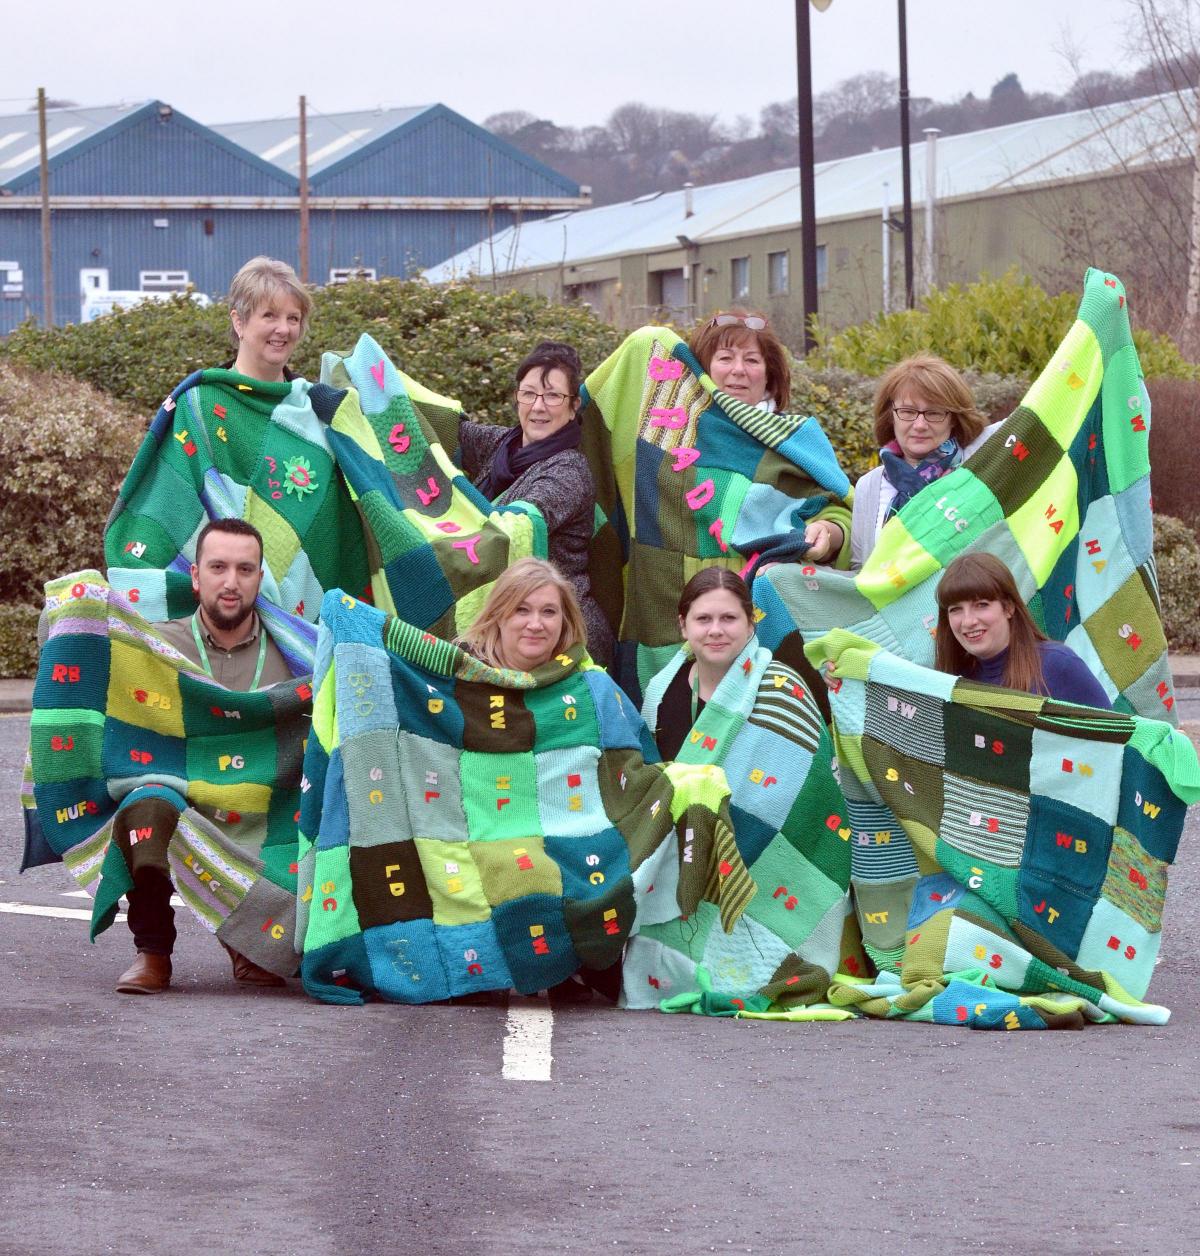 FEBRUARY Staff at Macmillan in Shipley raised funds by knitting blankets for the homeless